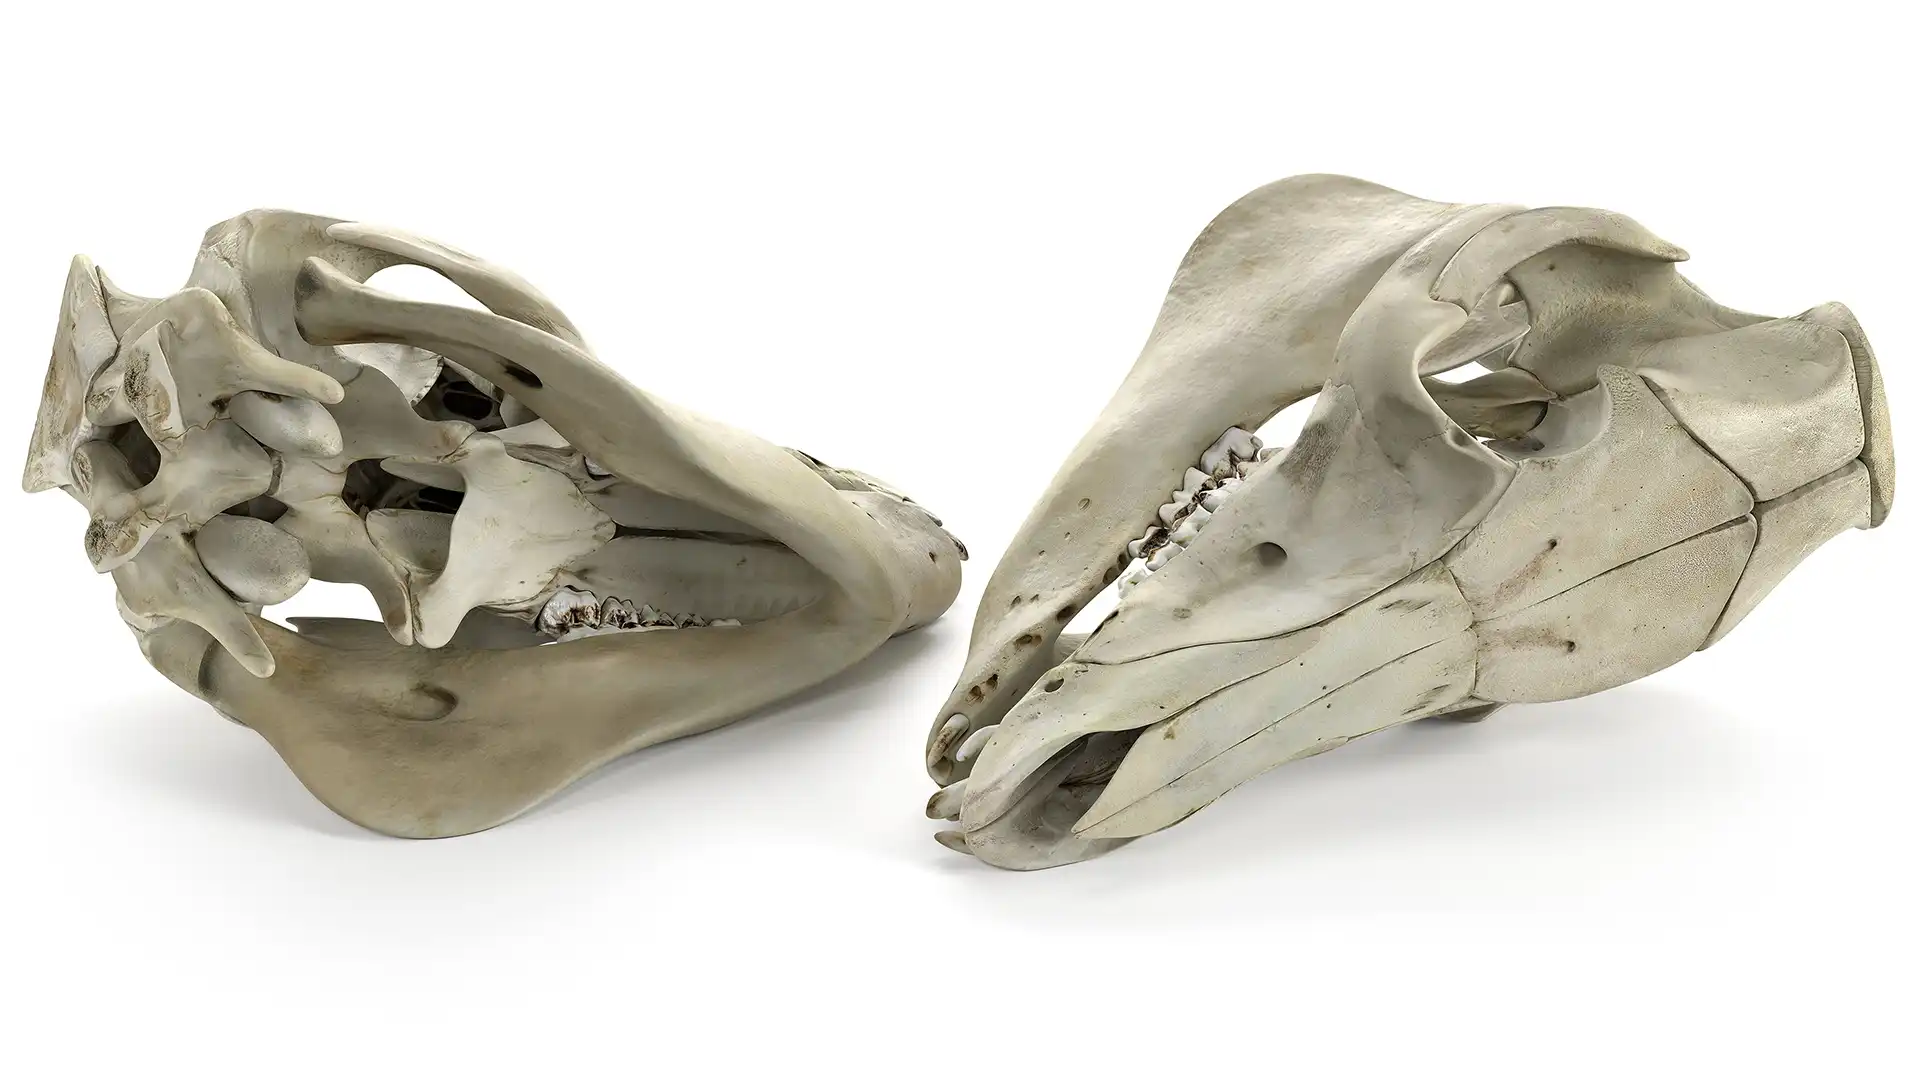 Realistic 3D rendering of two 3D models of animal skulls lying on opposite sides in a white studio to show all the hidden parts of a detailed anatomical 3D model of a pig skull from above and below. Proximal and distal views.